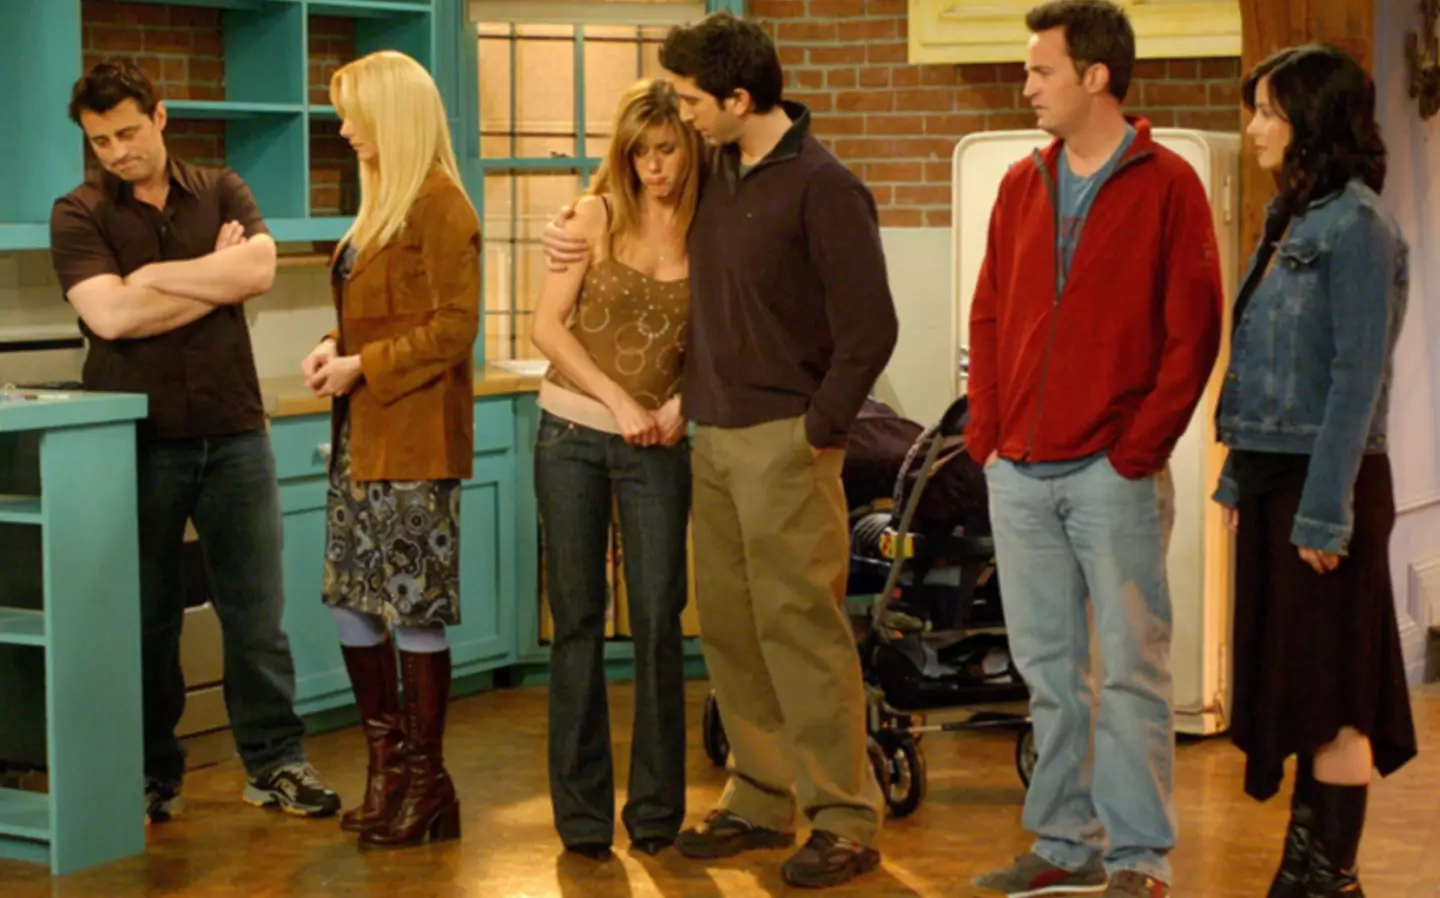 The Friends characters pack up Monica's apartment in the finale.